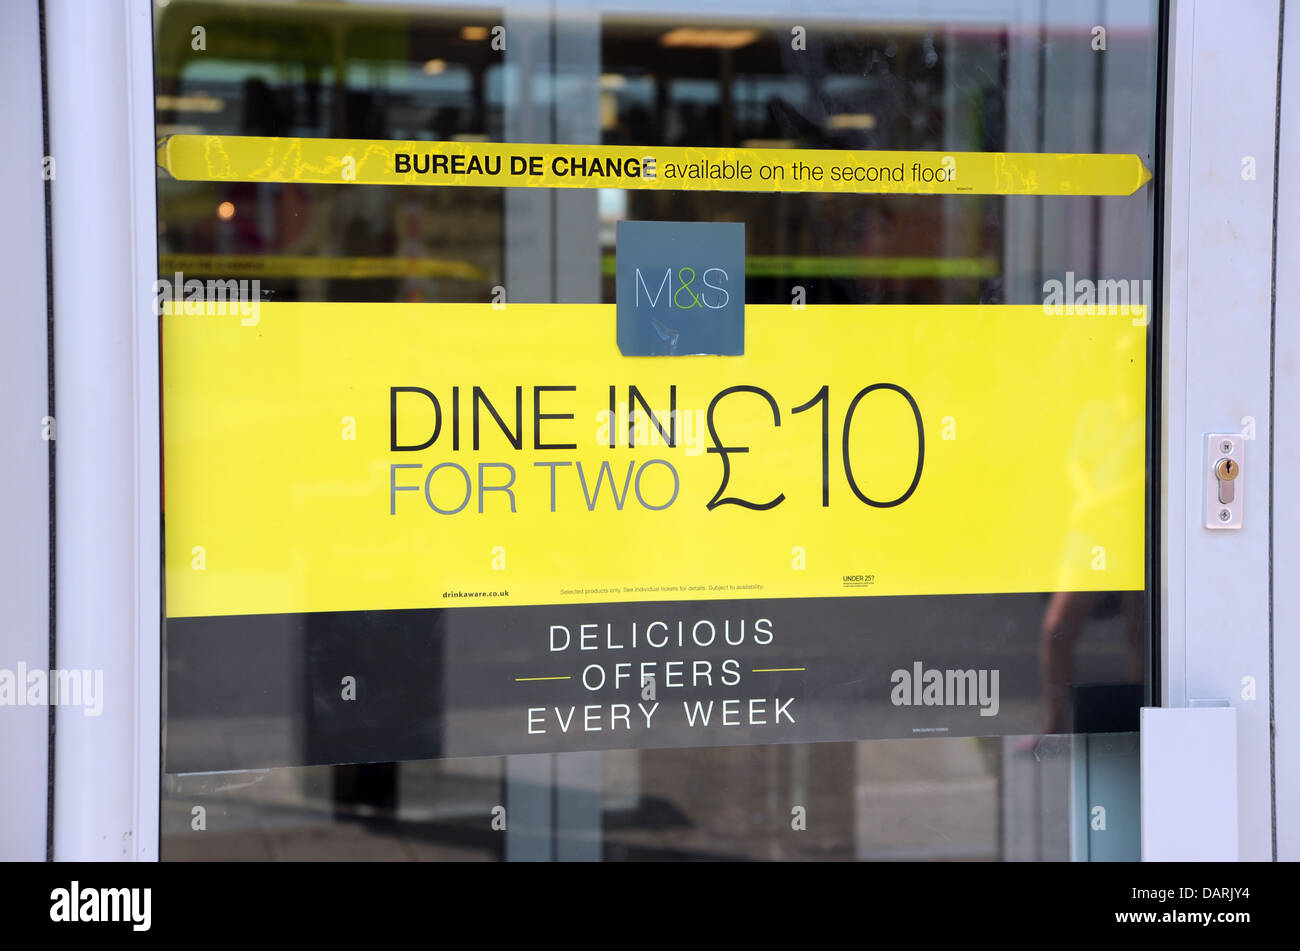 Dine in For Two for £10 offer sign at Marks and Spencer or M&S store UK  Stock Photo - Alamy